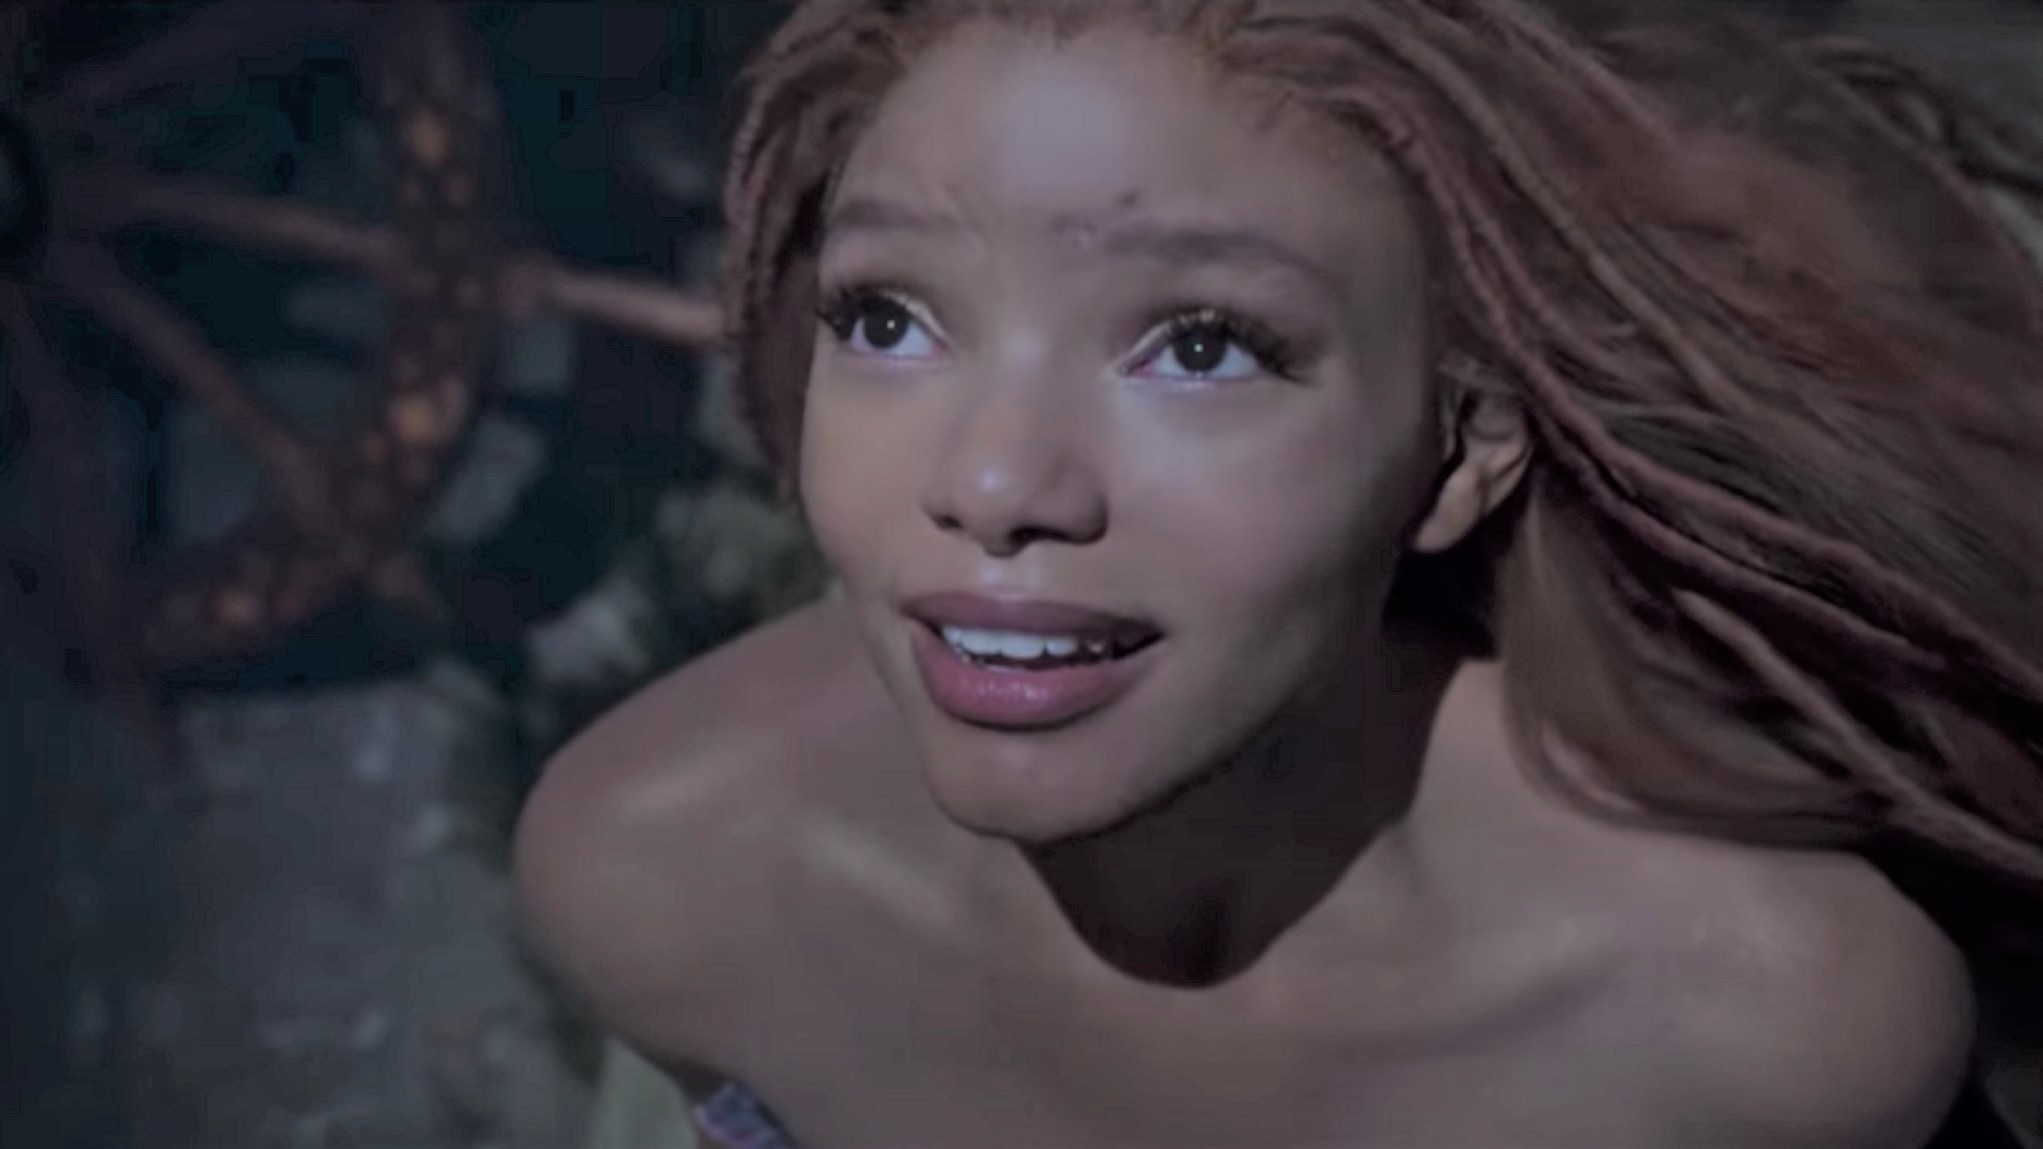 Listen To The Stunning New Version Of ‘Part of Your World’ By Halle Bailey From The Little Mermaid